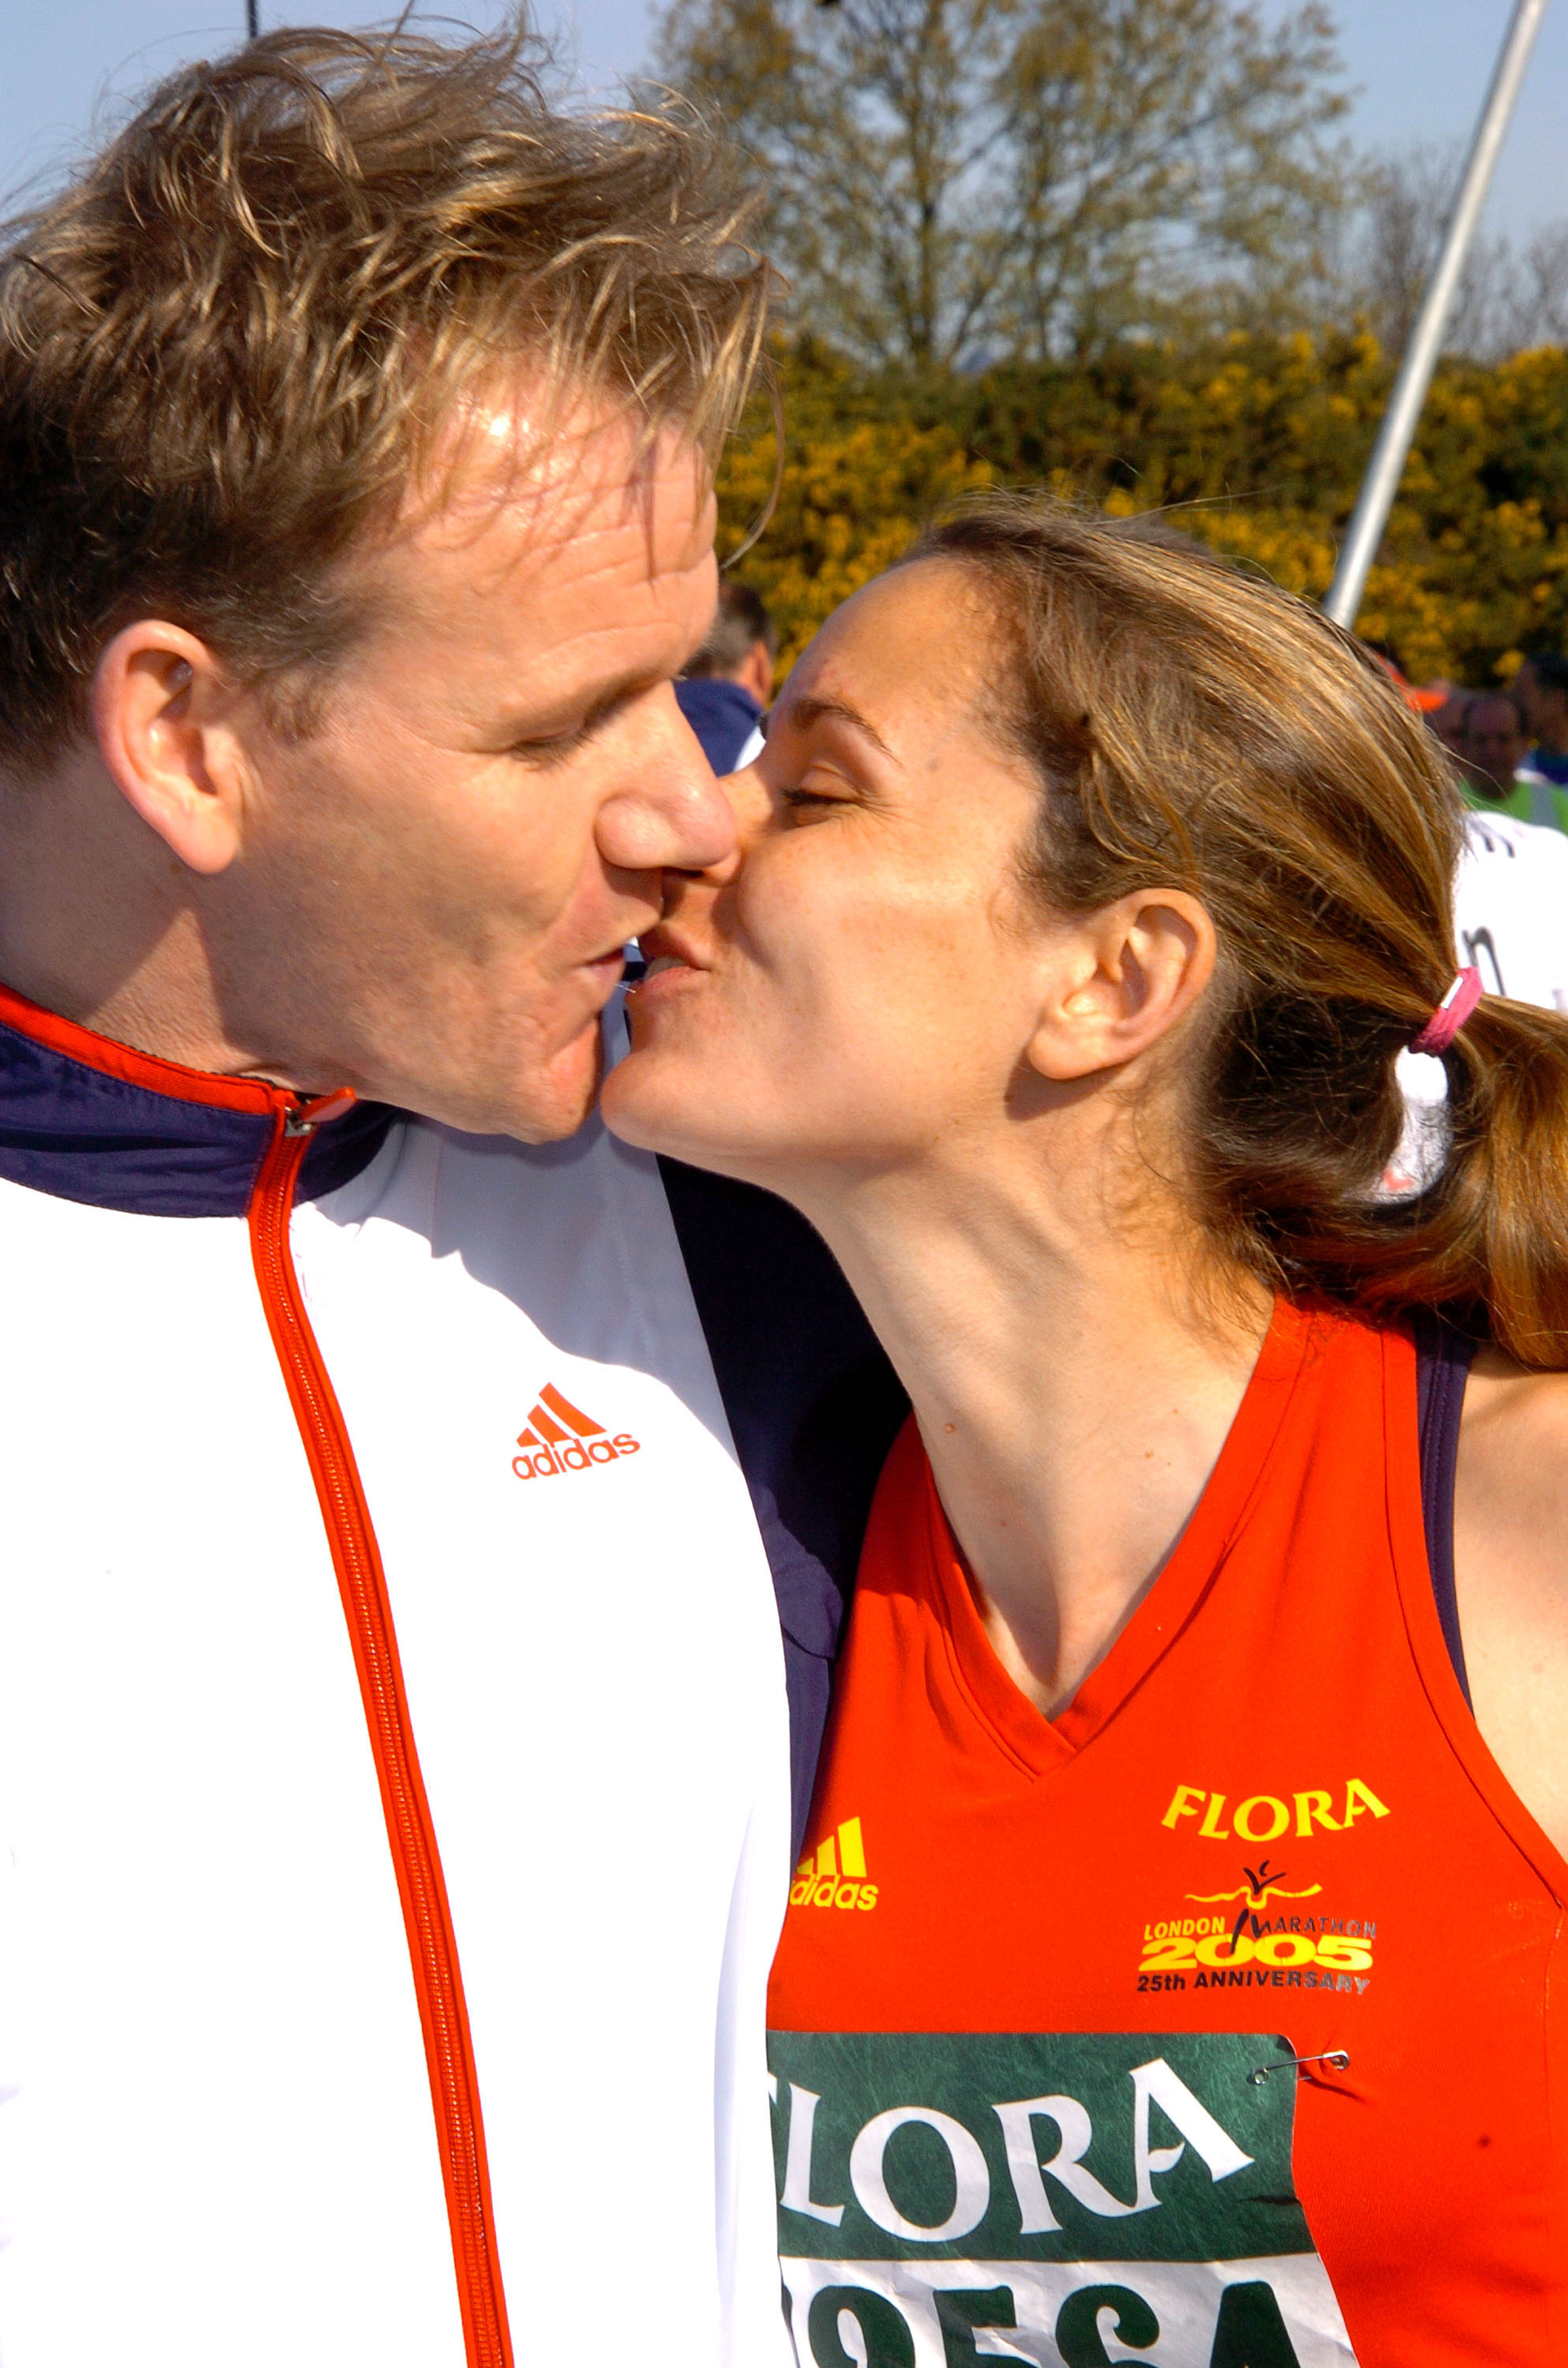 The couple during 2005 Flora London Marathon at The Mall on April 17, 2005 in London, Great Britain. | Source: Getty Images